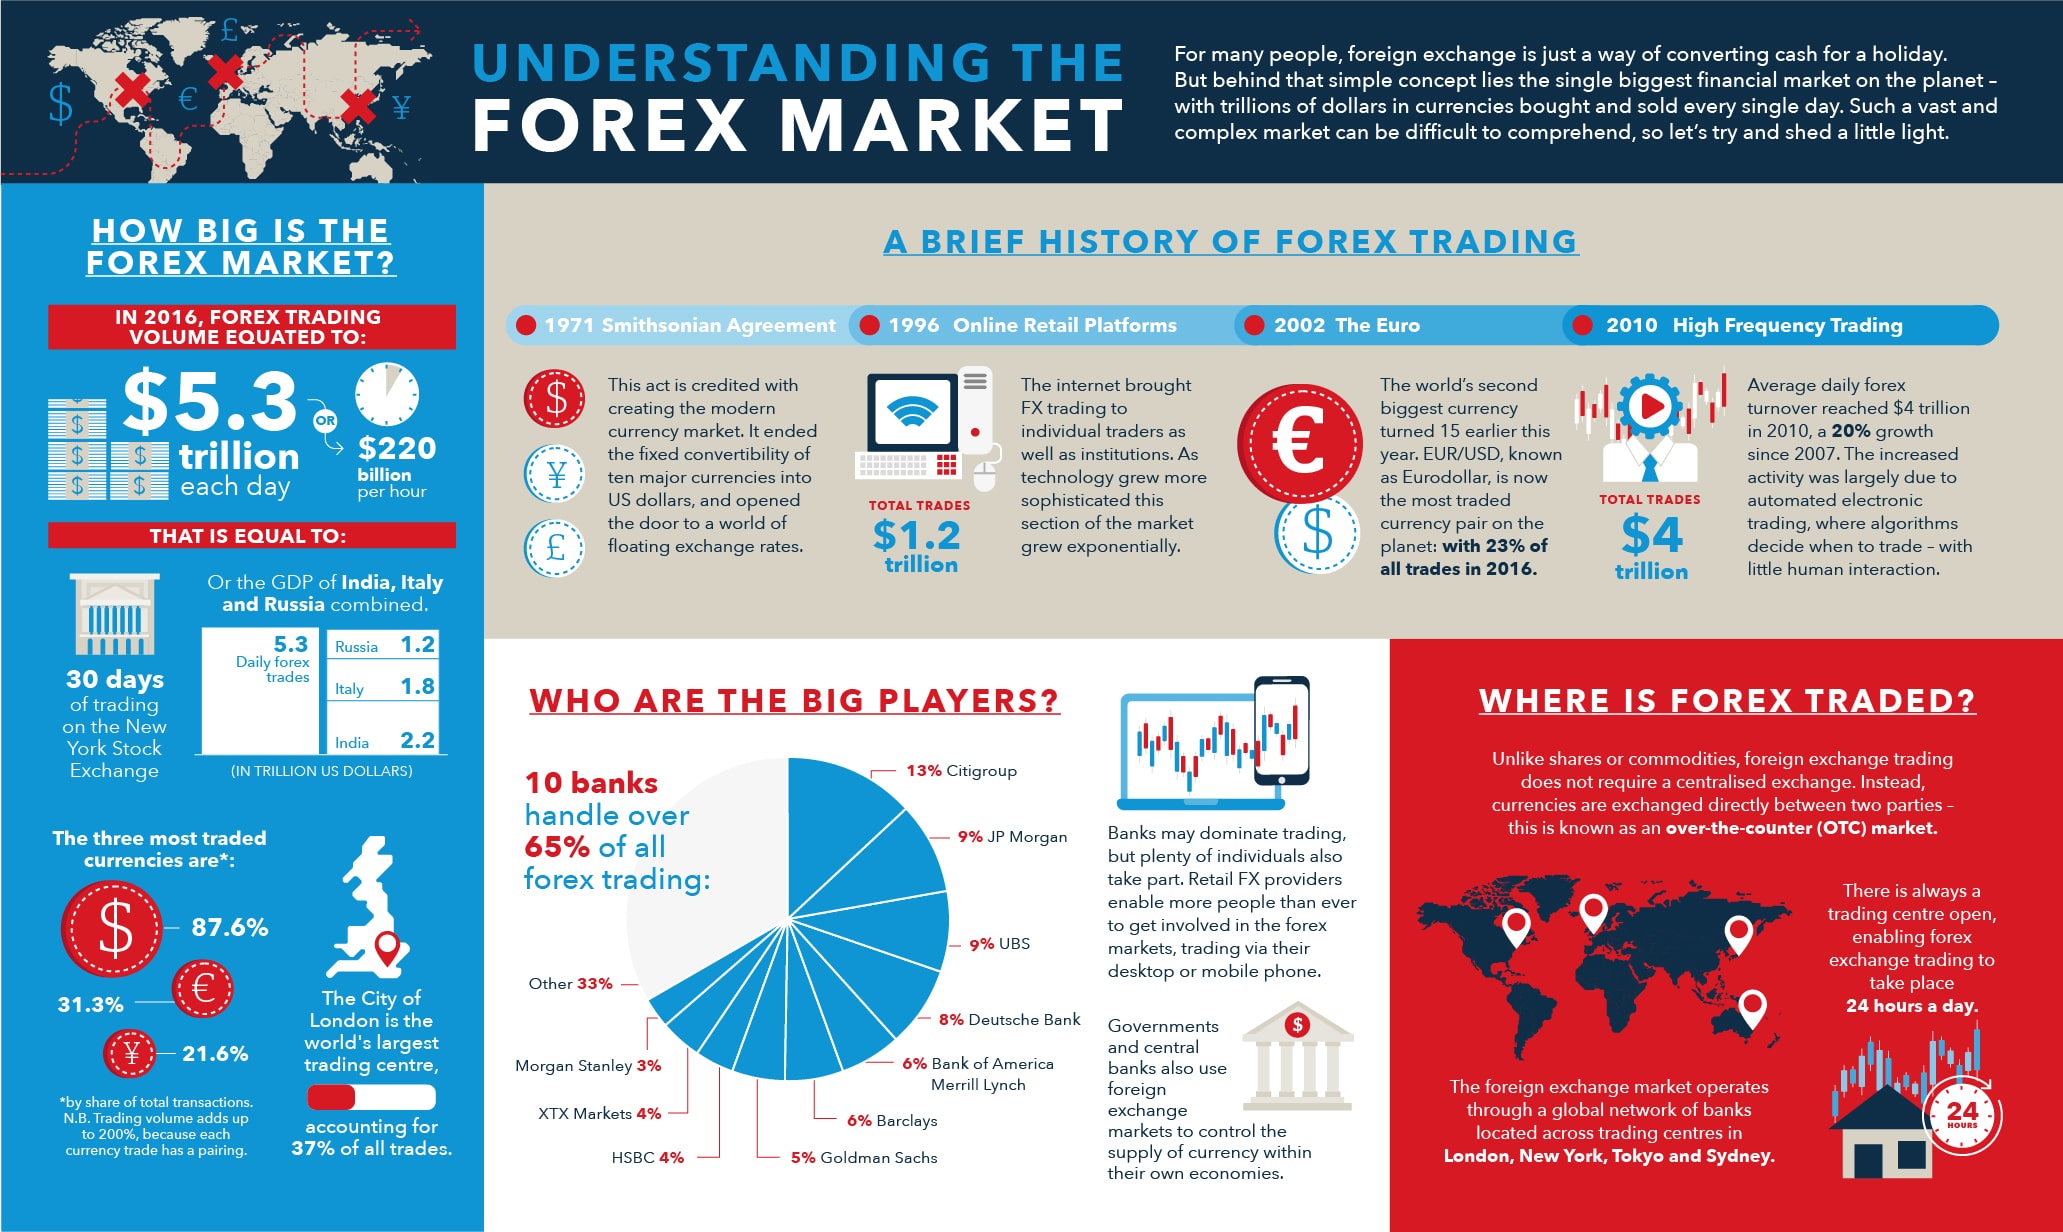 The forex market